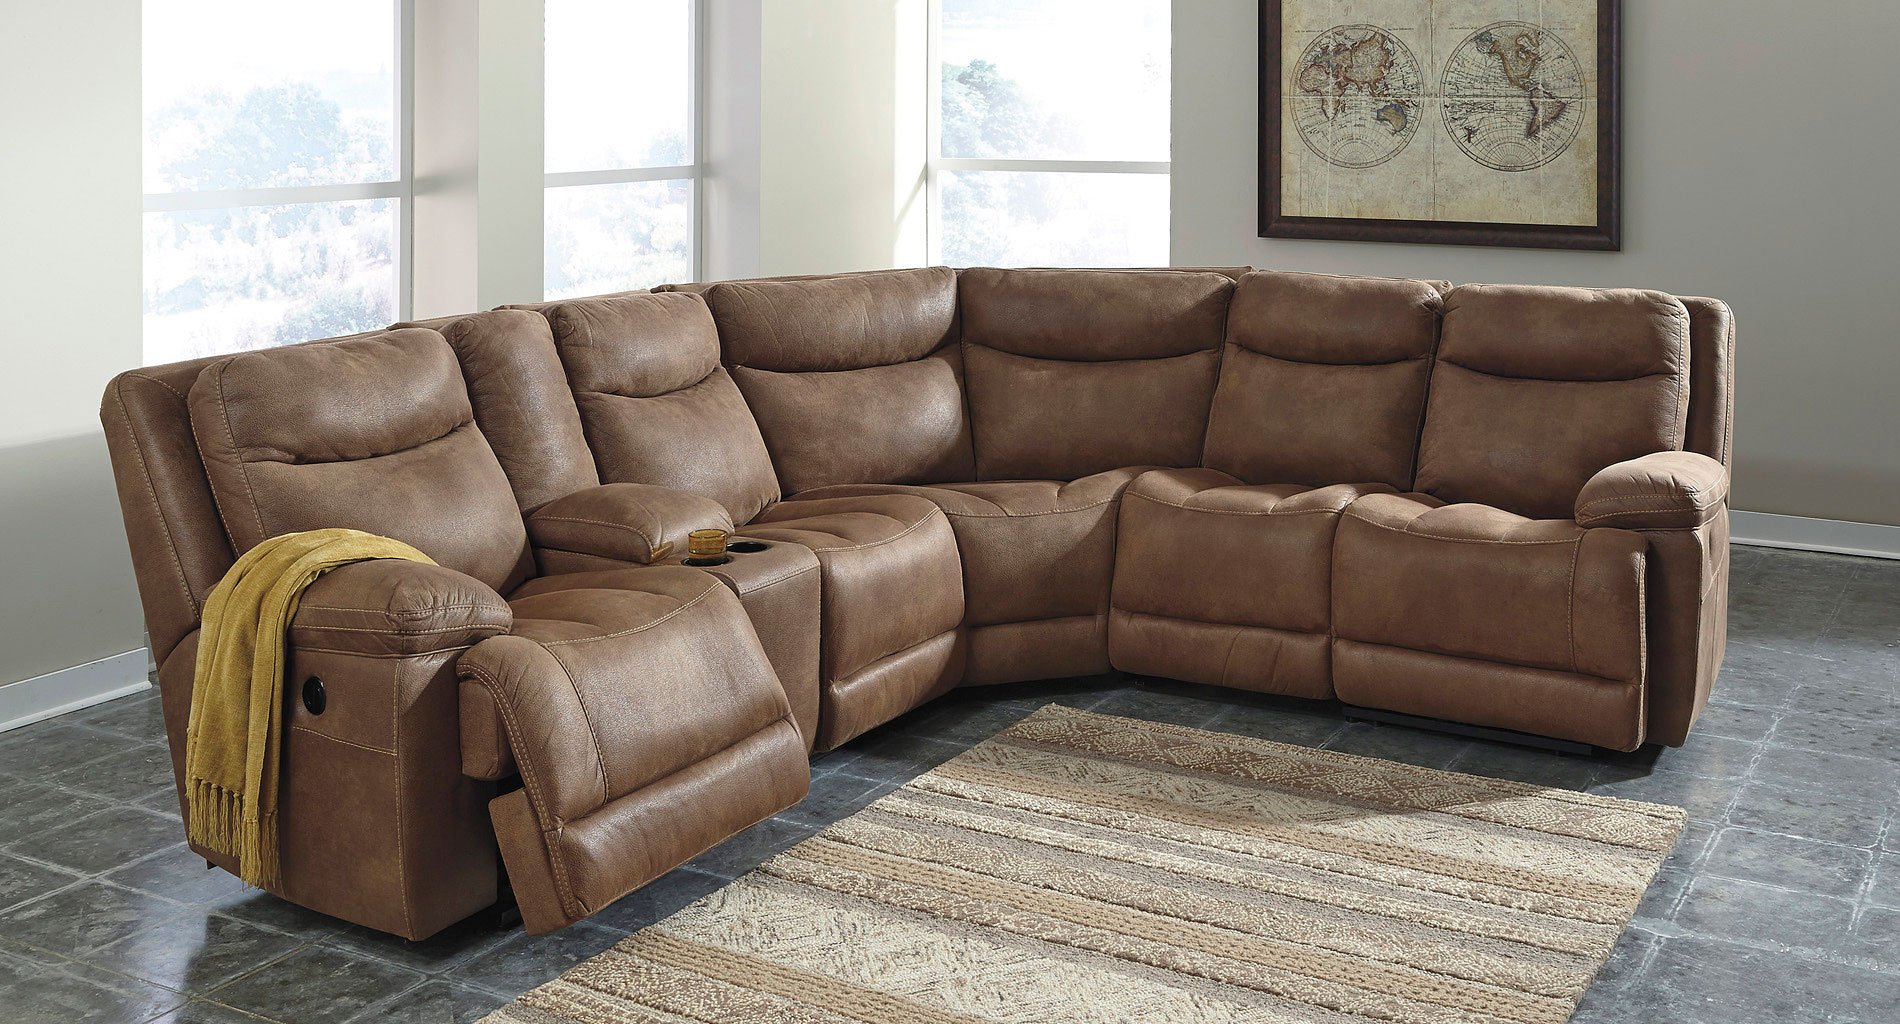 Valto Saddle Modular Reclining Sectional by Signature Design by Ashley